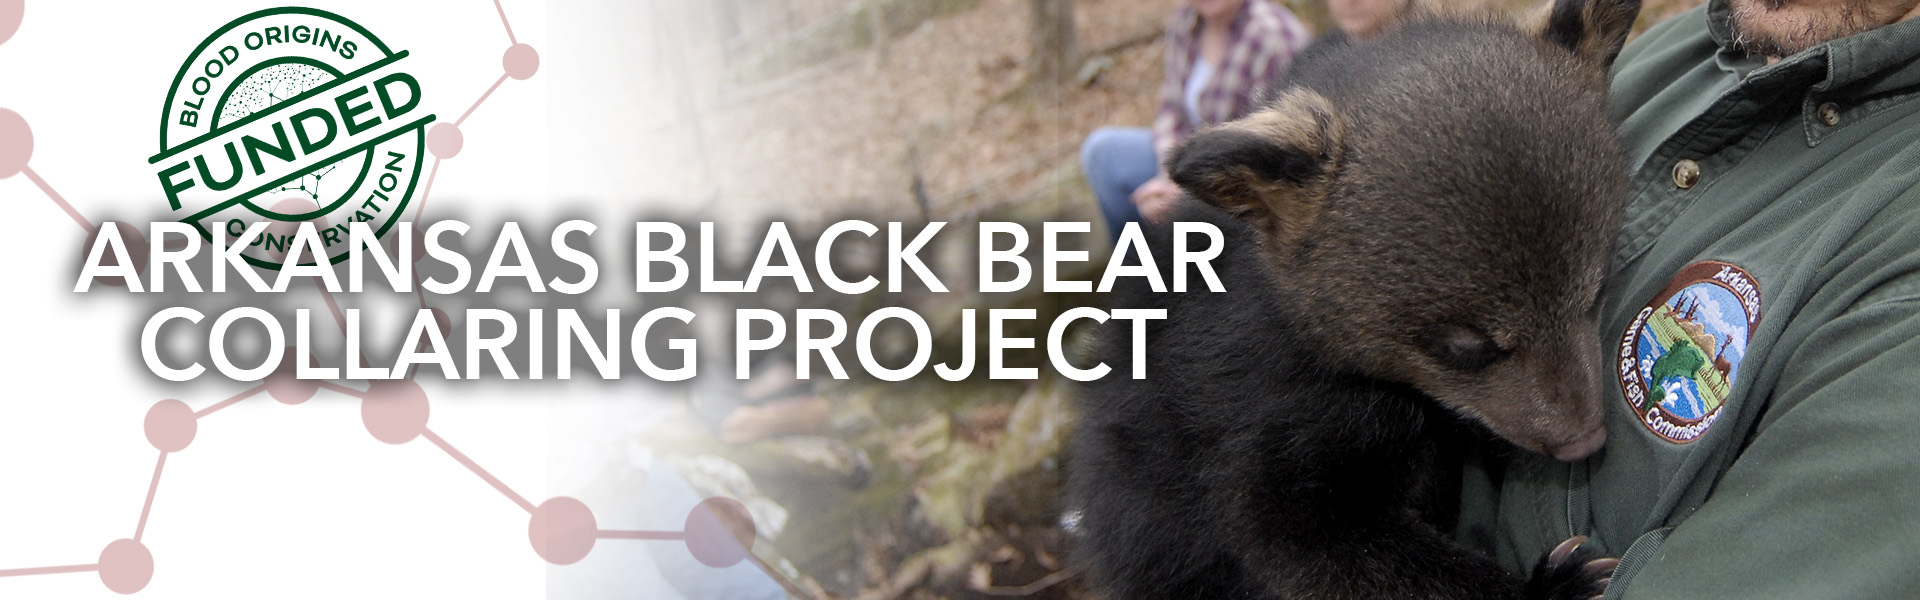 blood origins akansas black bear collaring conservation project banner FUNDED